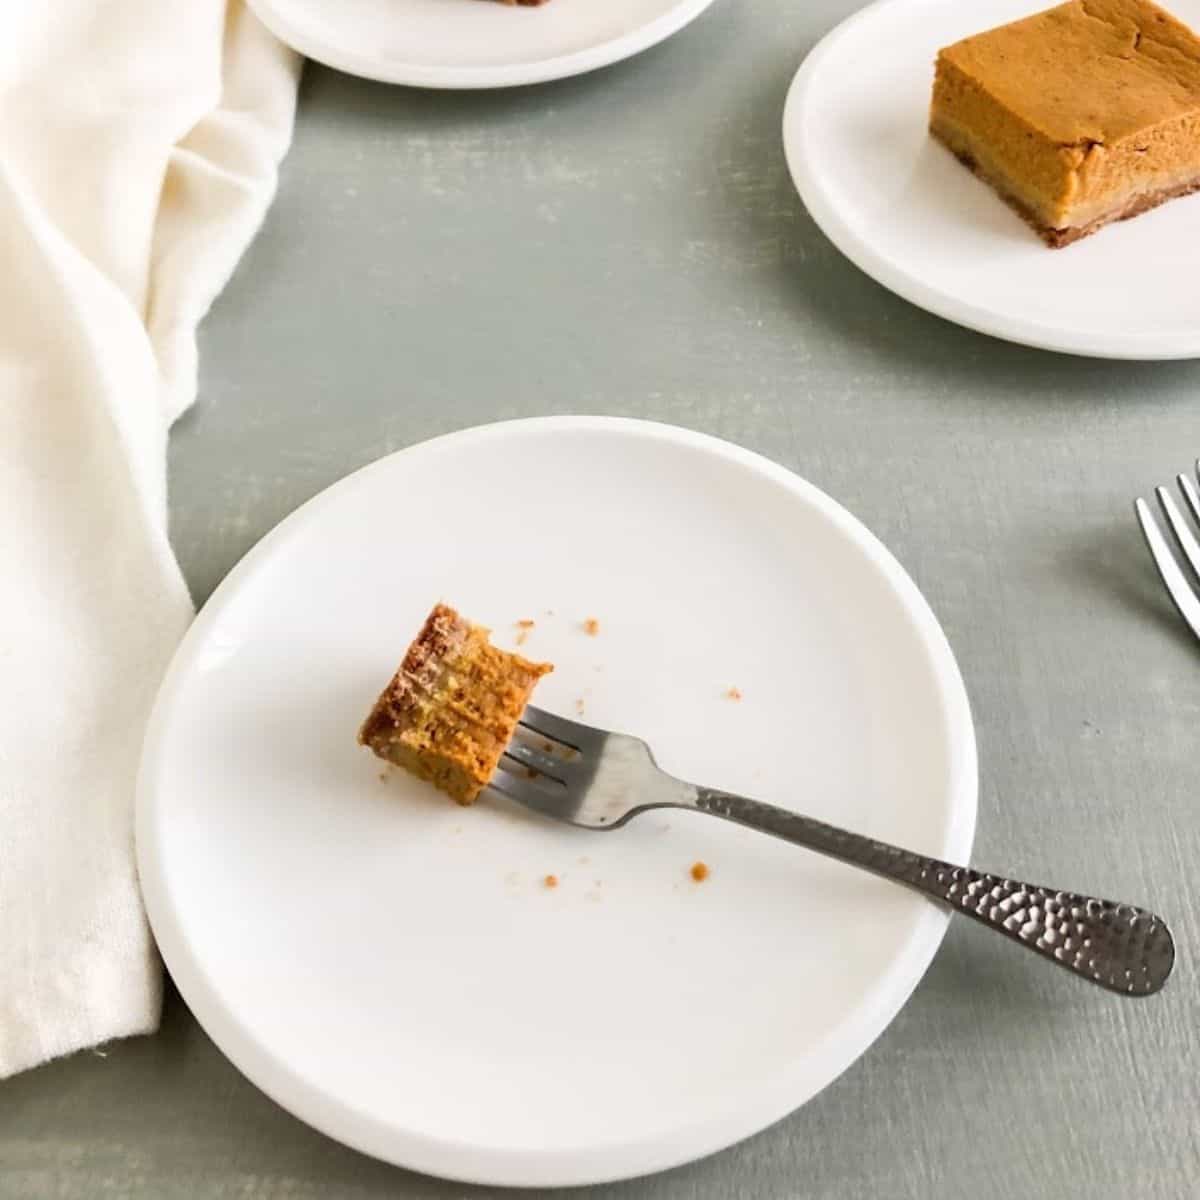 Small round white plate with silver cocktail fork with one bite of pie bar on the fork left. Additional silver cocktail forks and small round white plates with pieces of pie bars in the background. Cream cloth napkin next to plates.